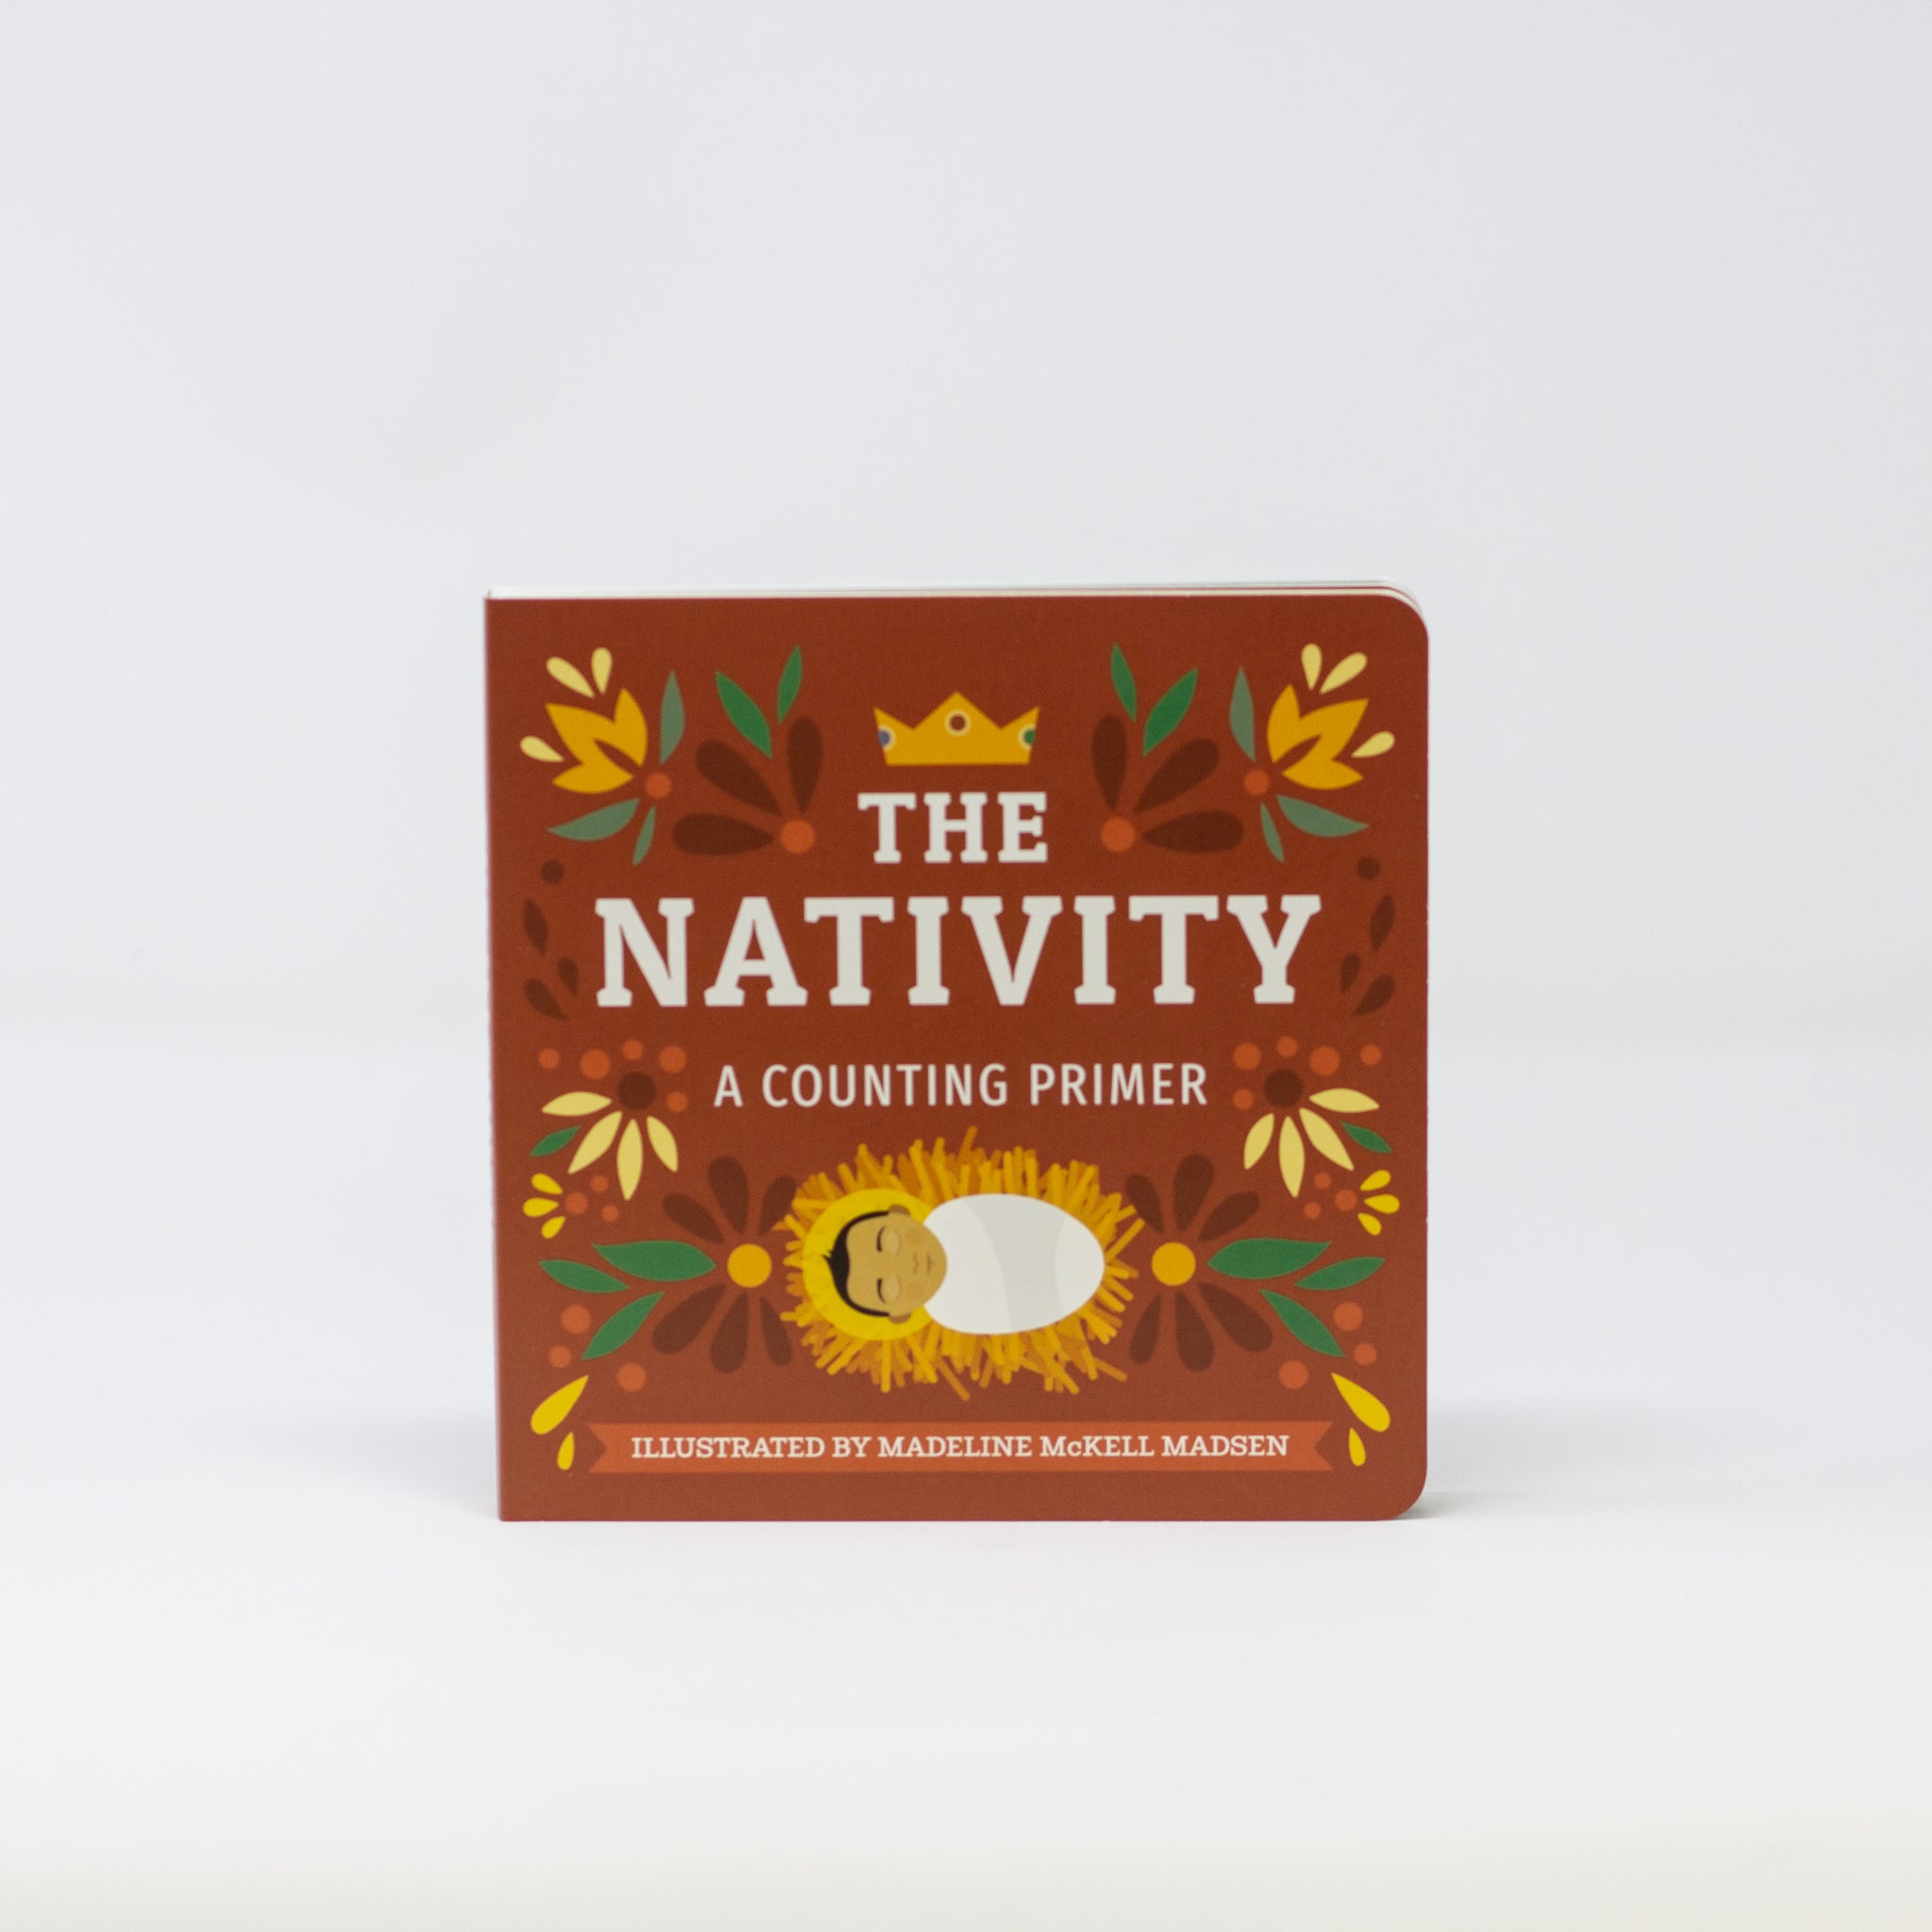 The Nativity - A Counting Primer